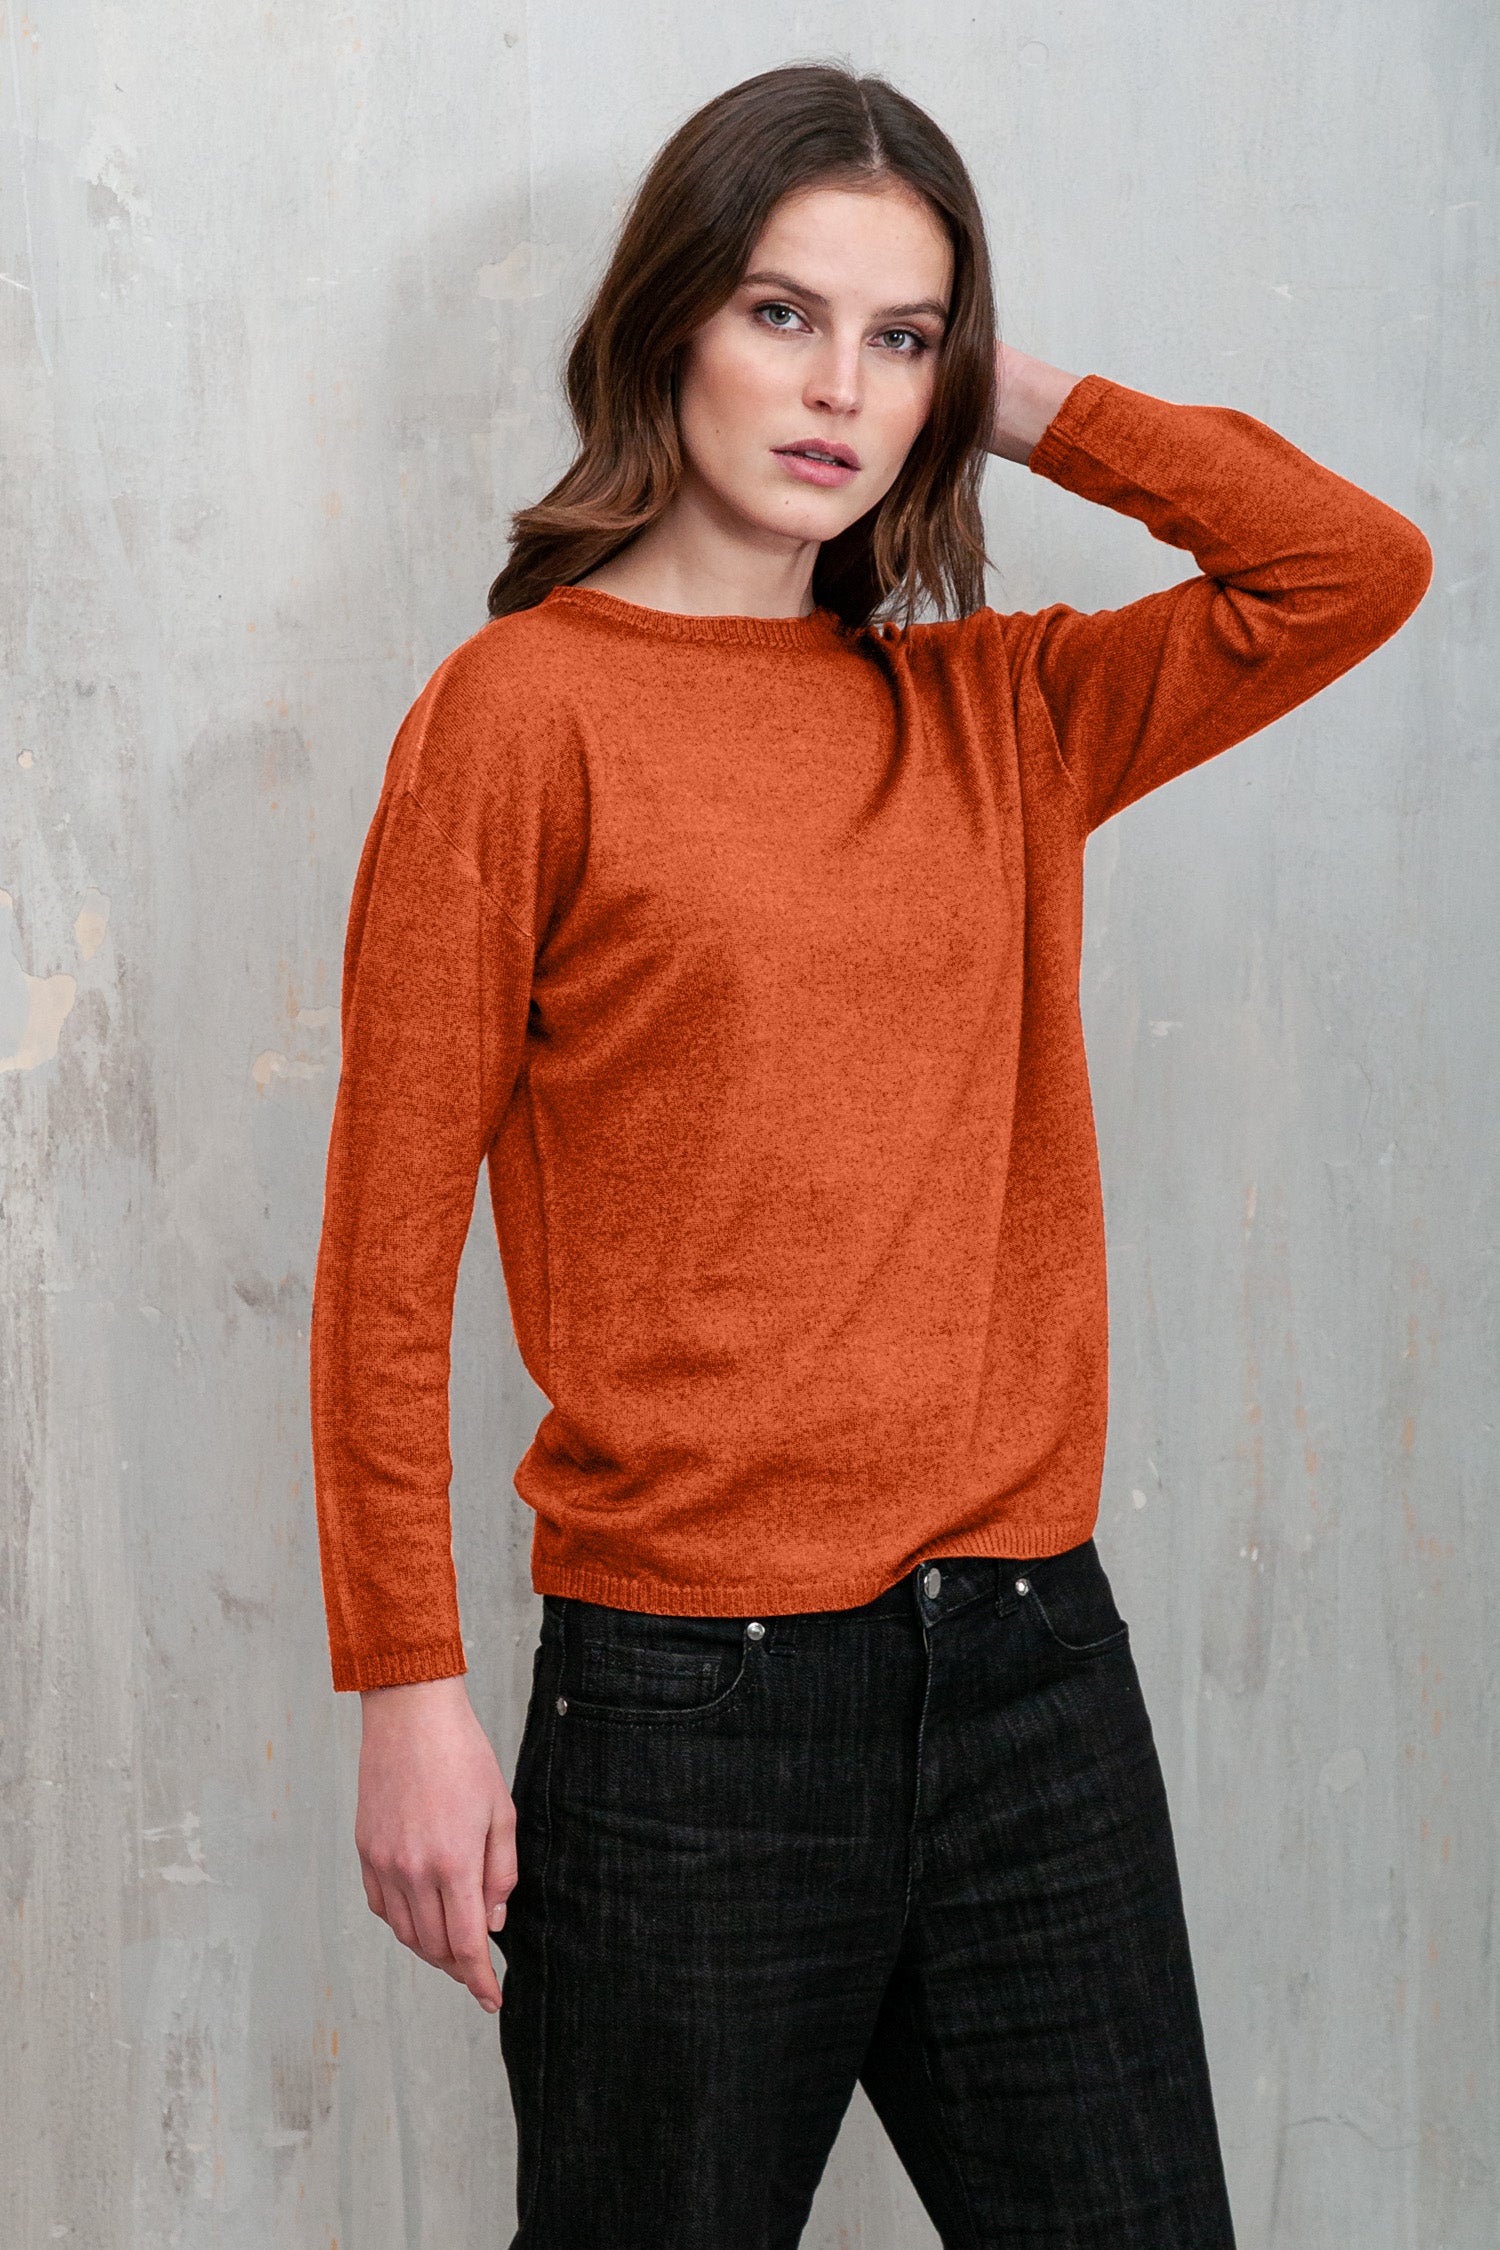 Reay Comfy Sweater - Persimmon